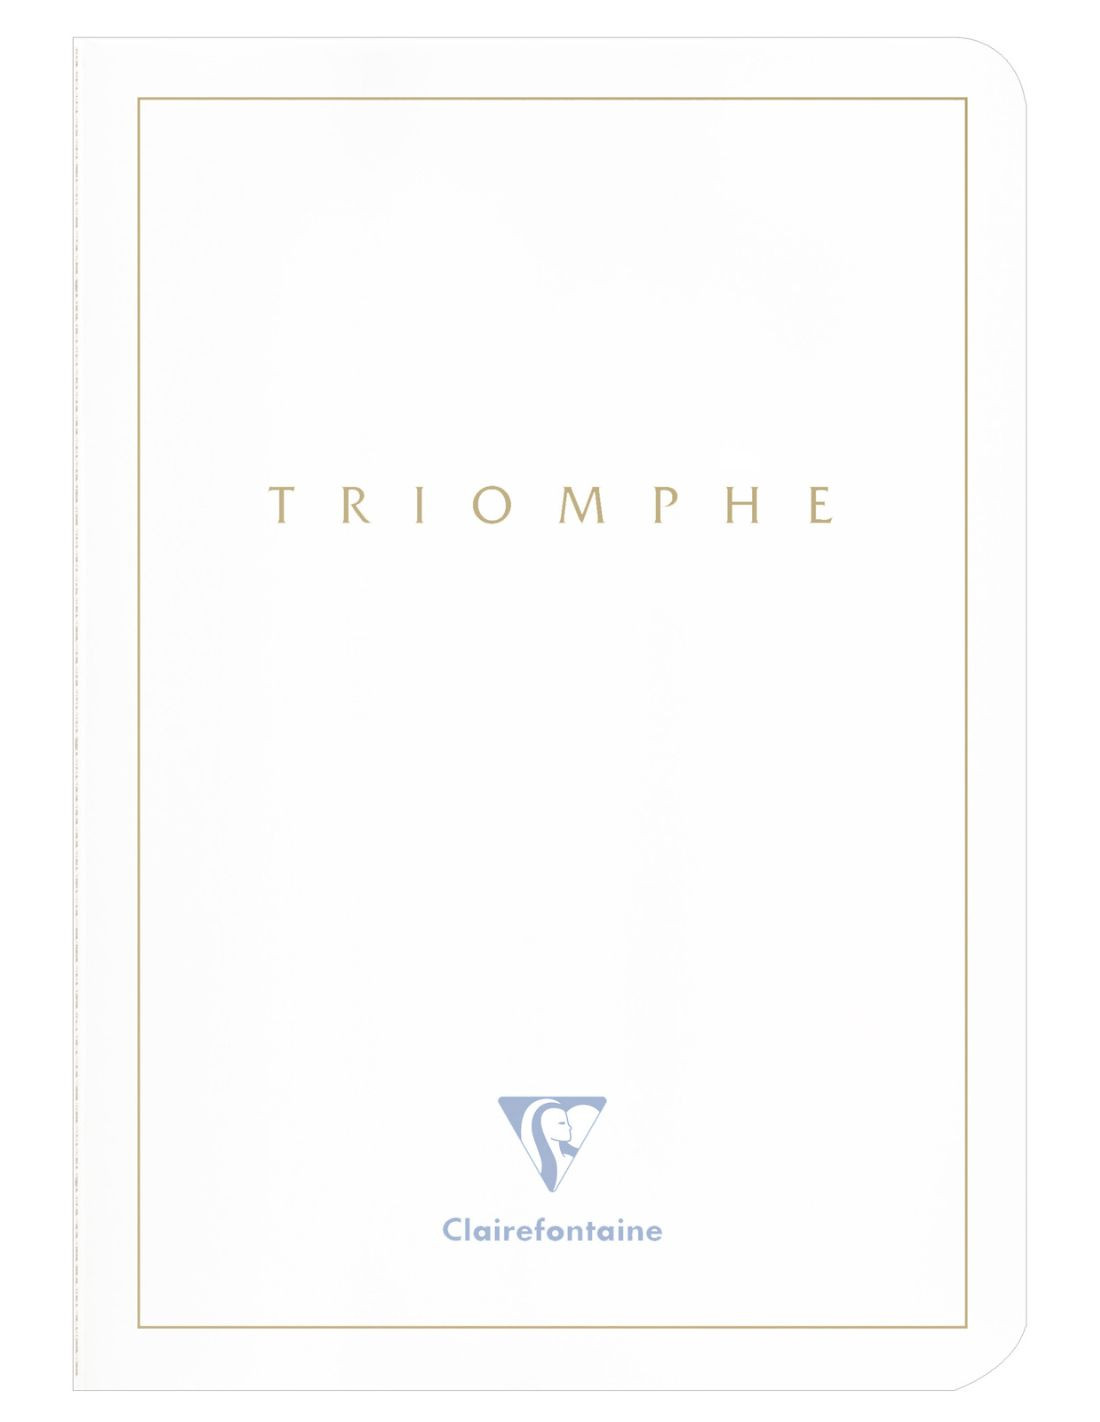 Clairefontaine Triomphe Gold A4 Lined Notebook